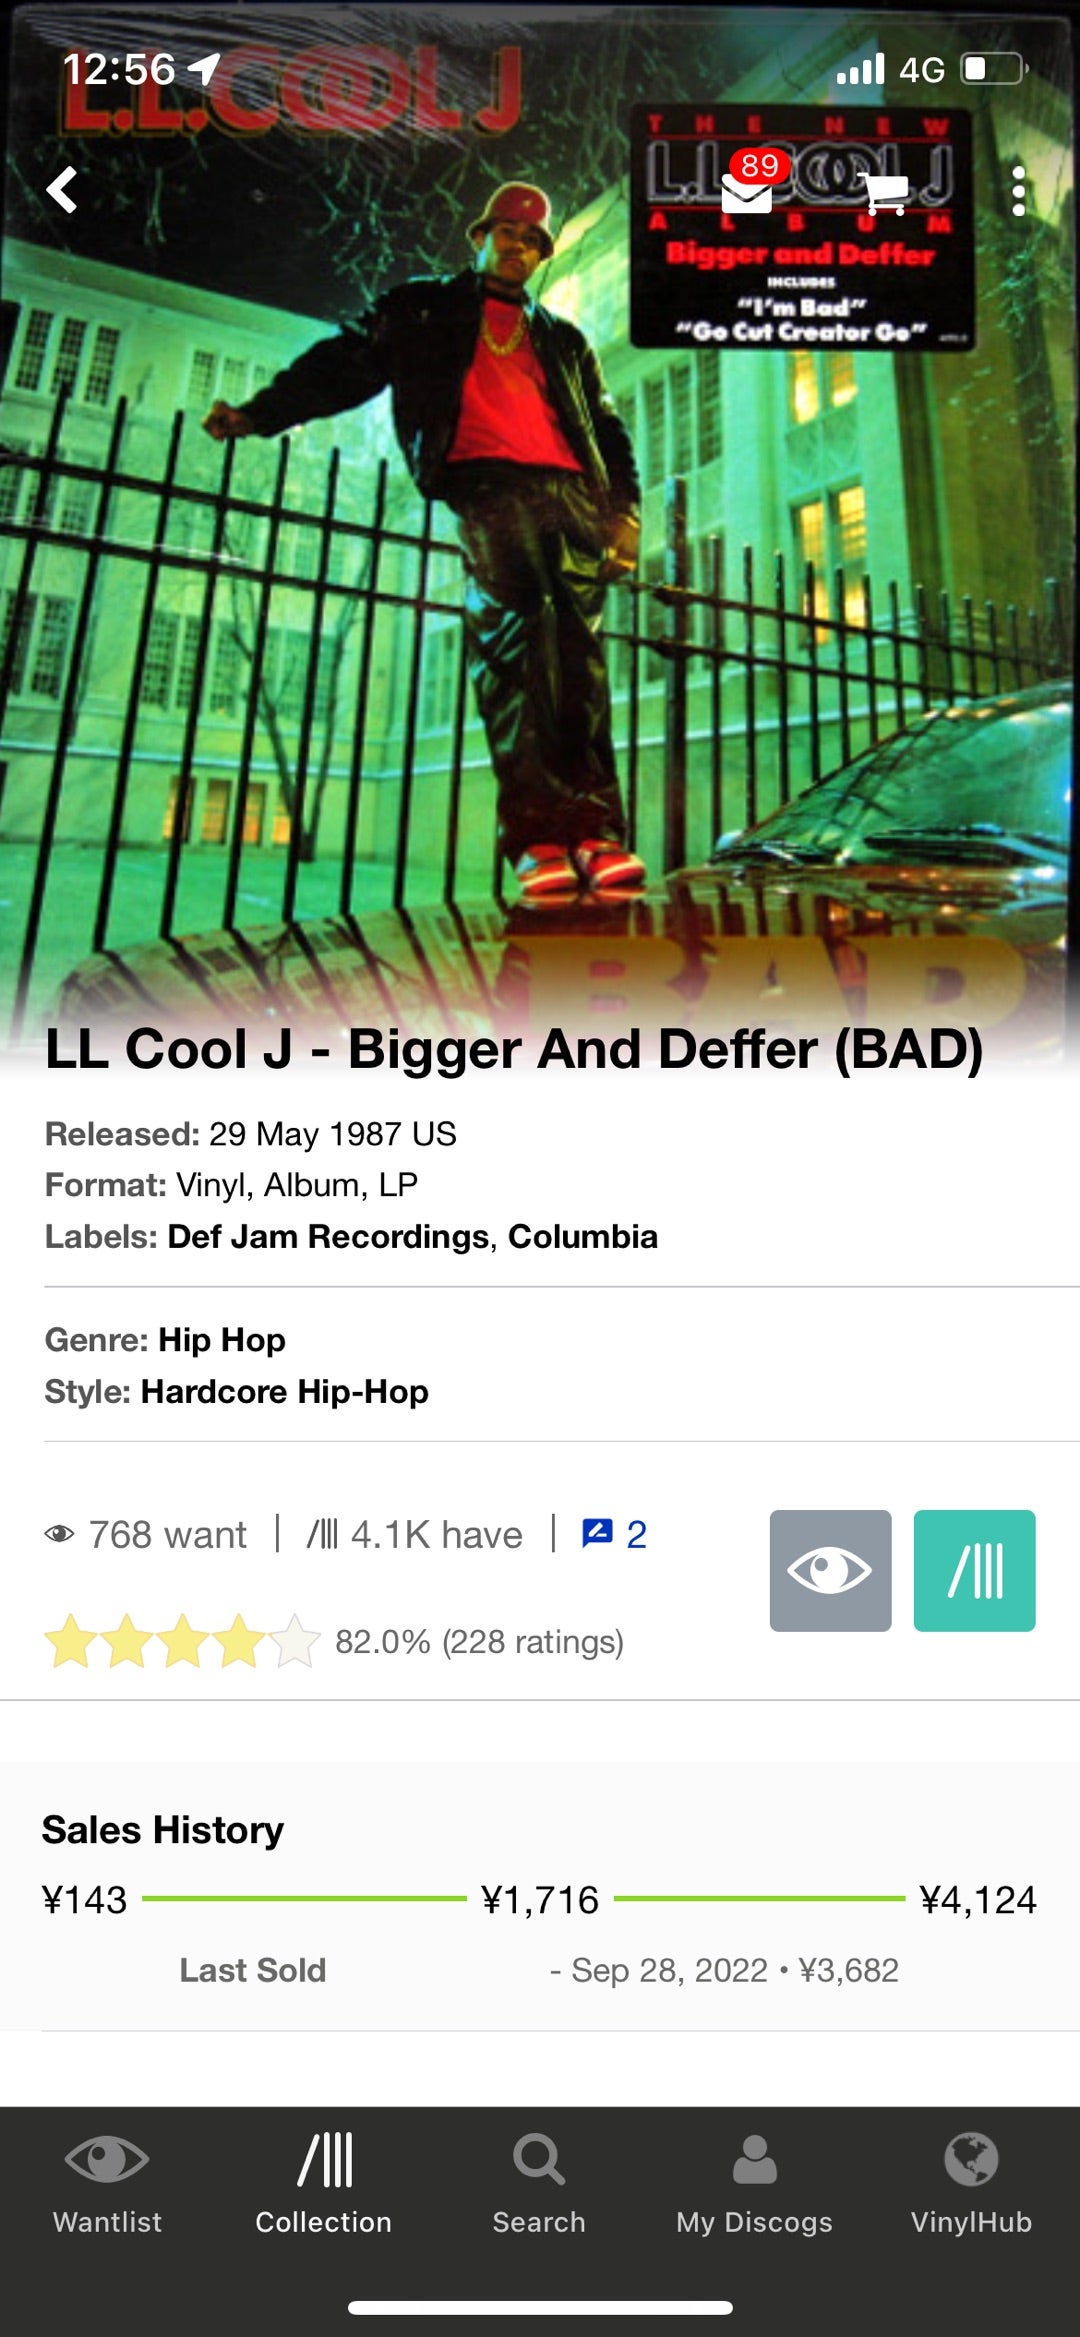 LL COOL J Bigger And Deffer (BAD) HERETIC!!!